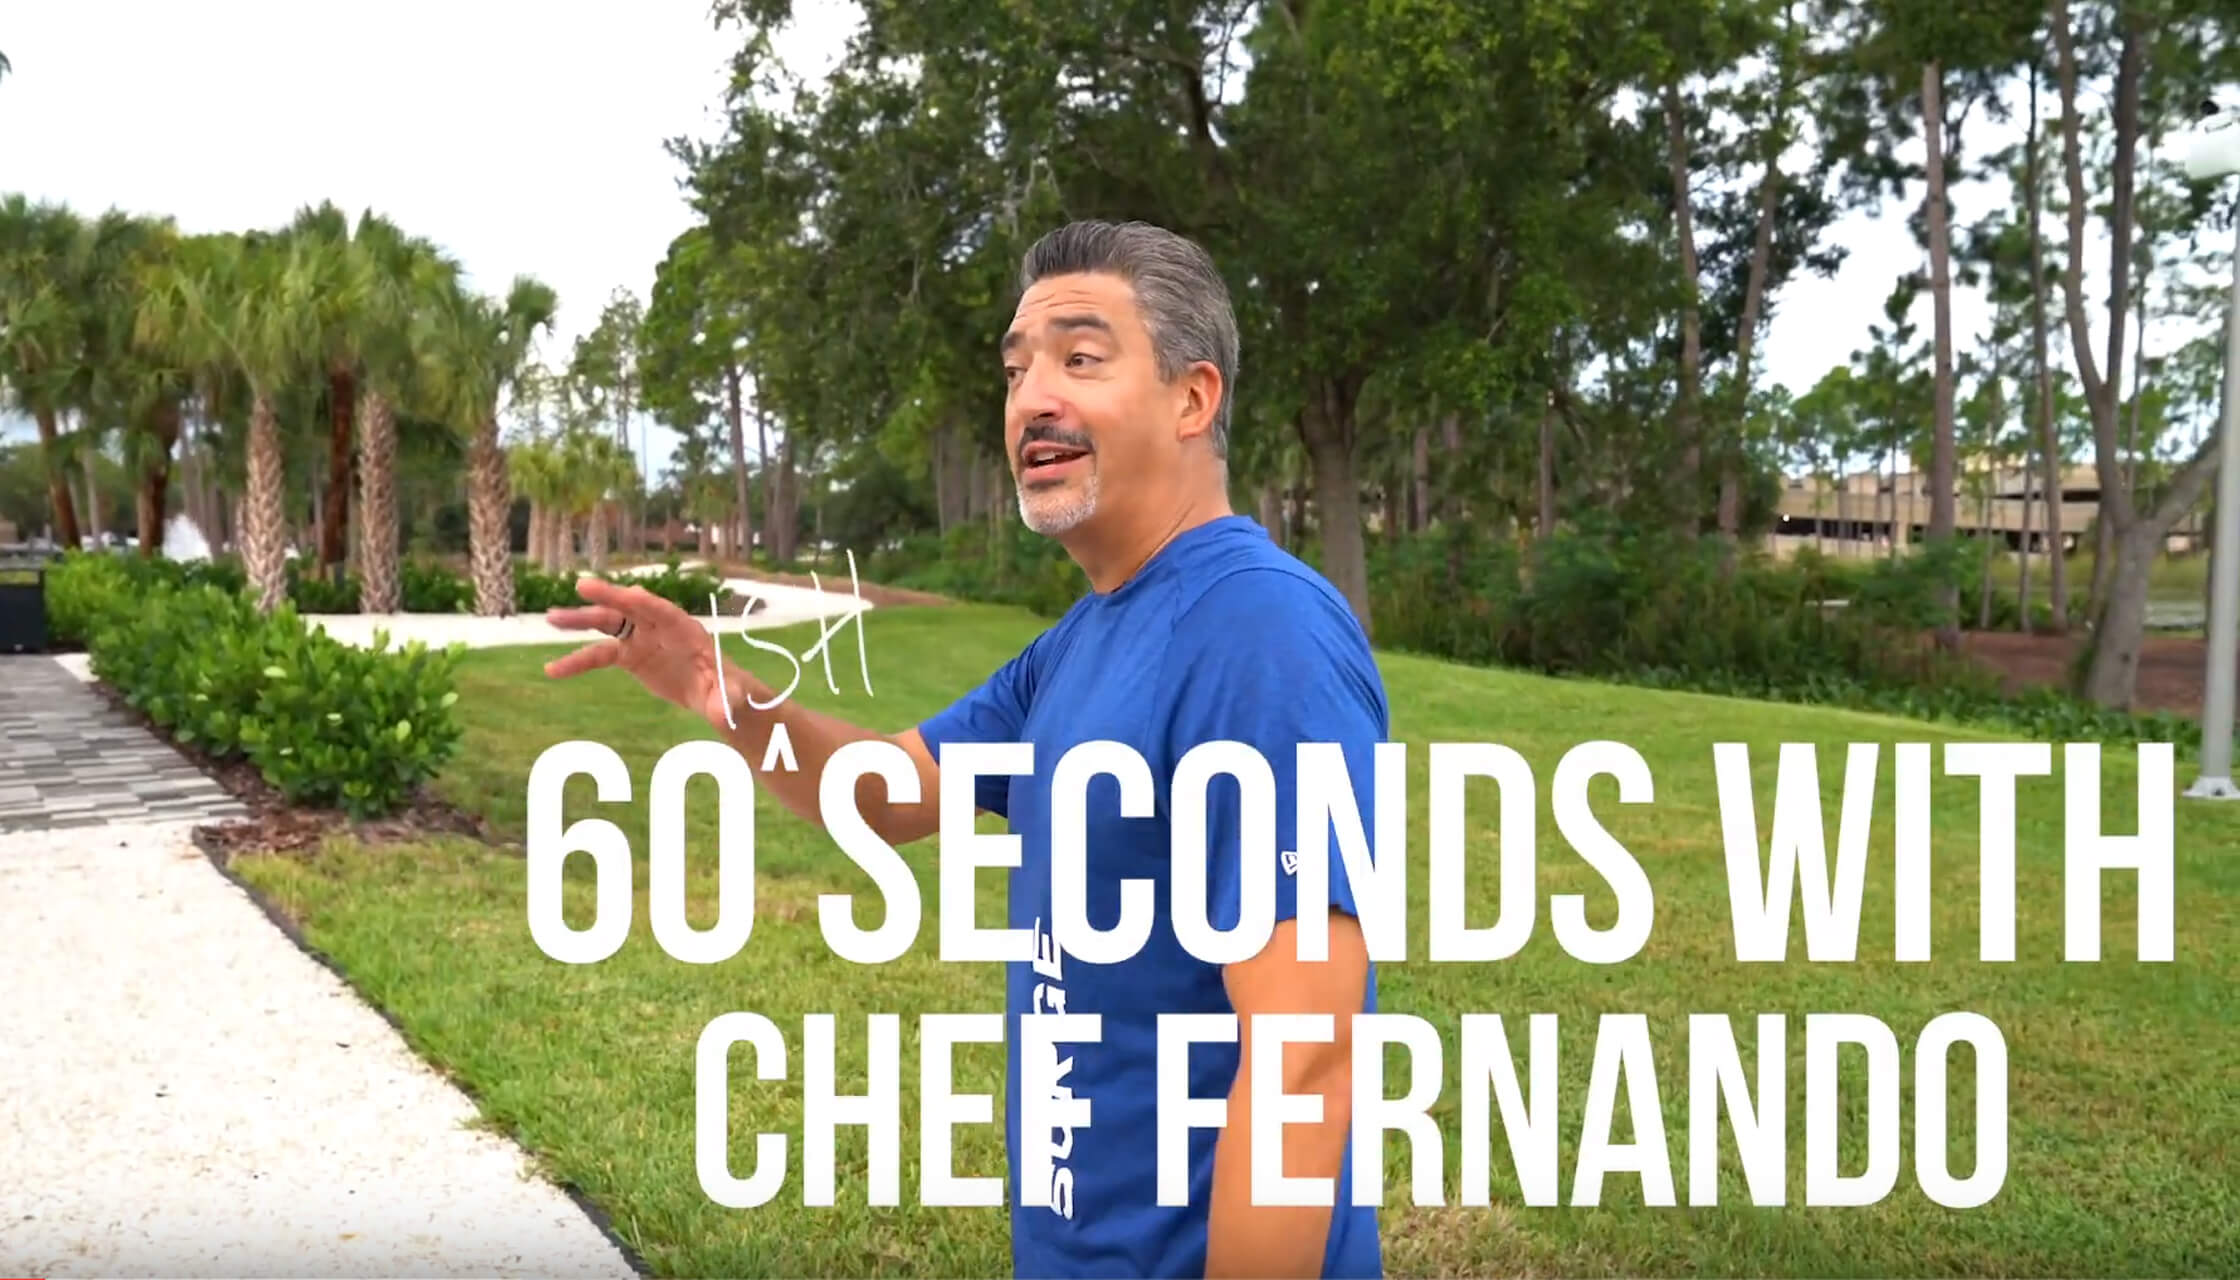 60-ish seconds with Chef Fernando!